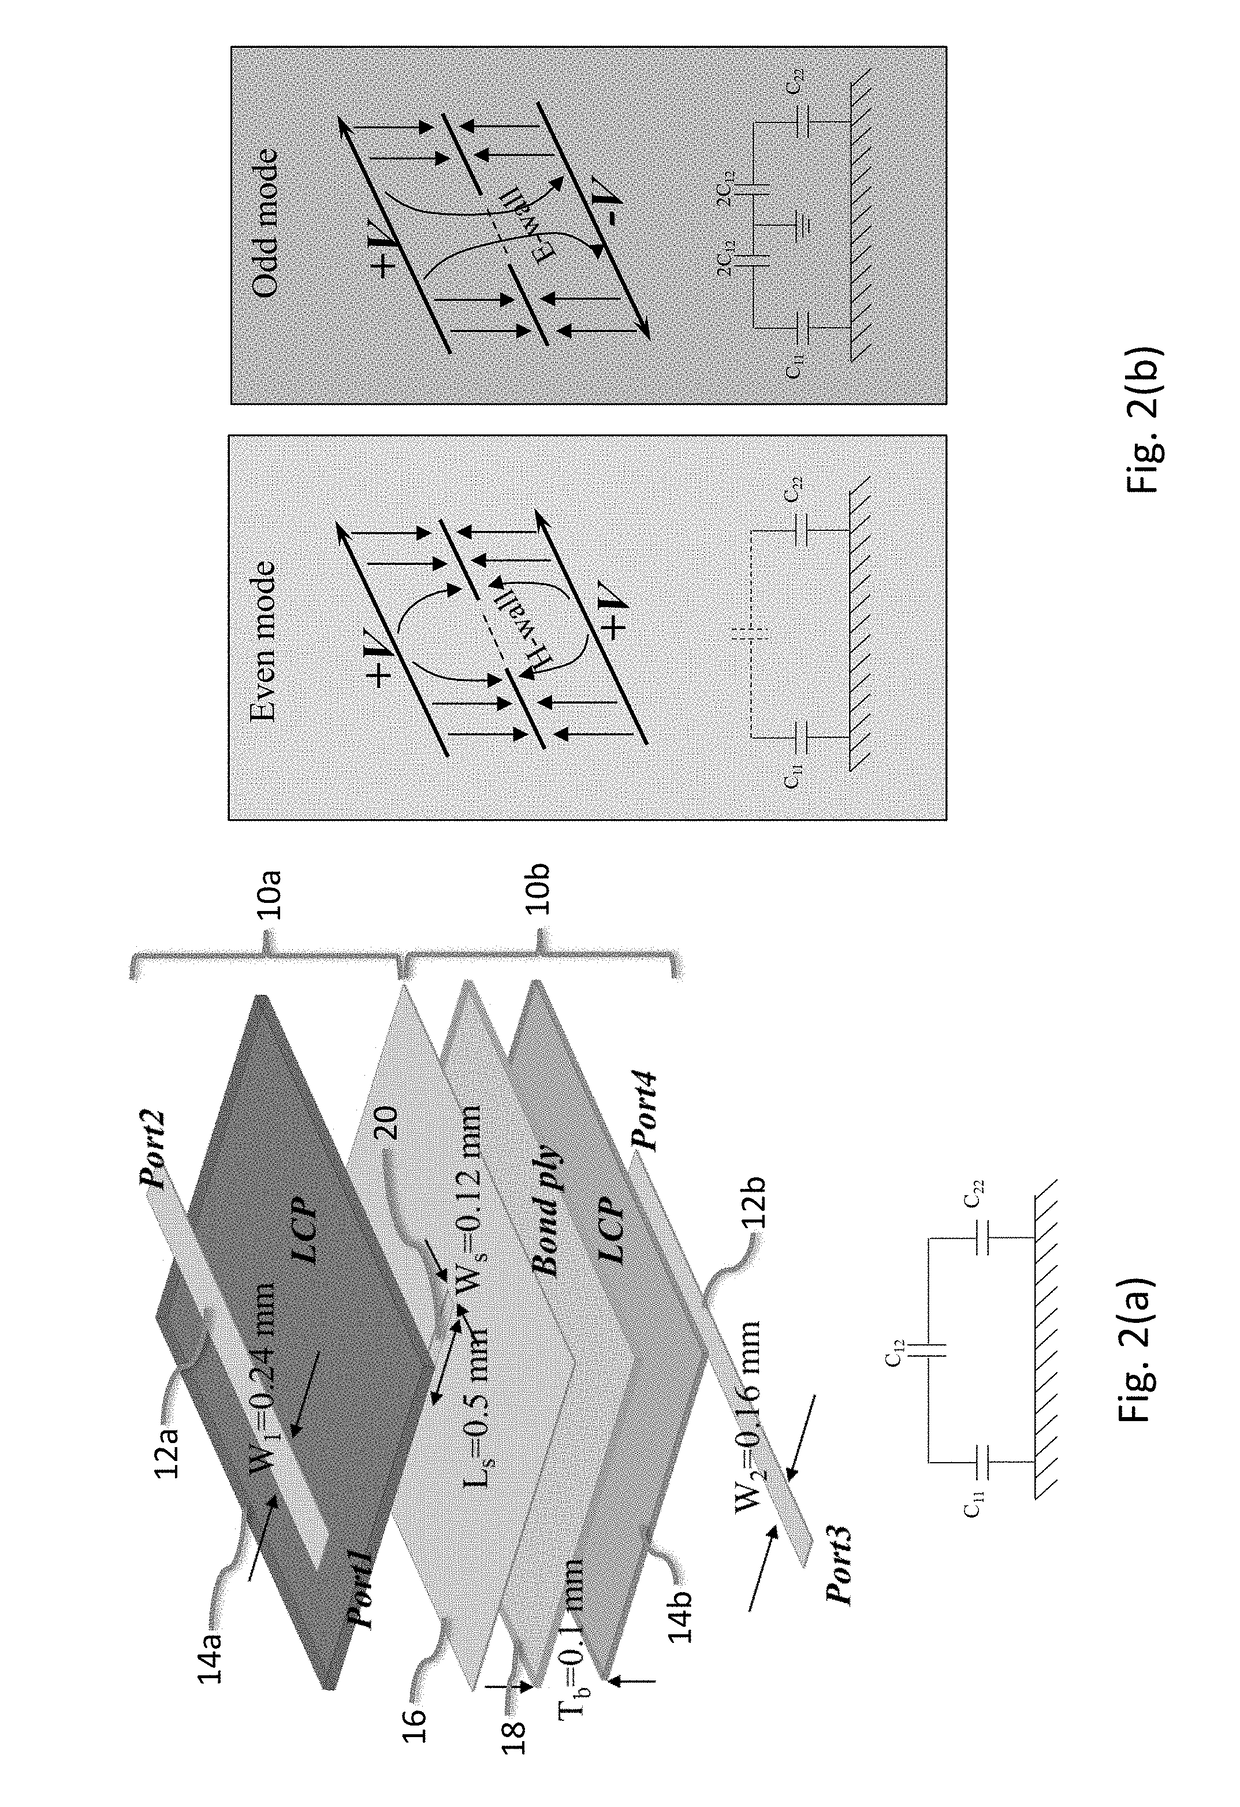 Slot coupled directional coupler and directional filters in multilayer substrate